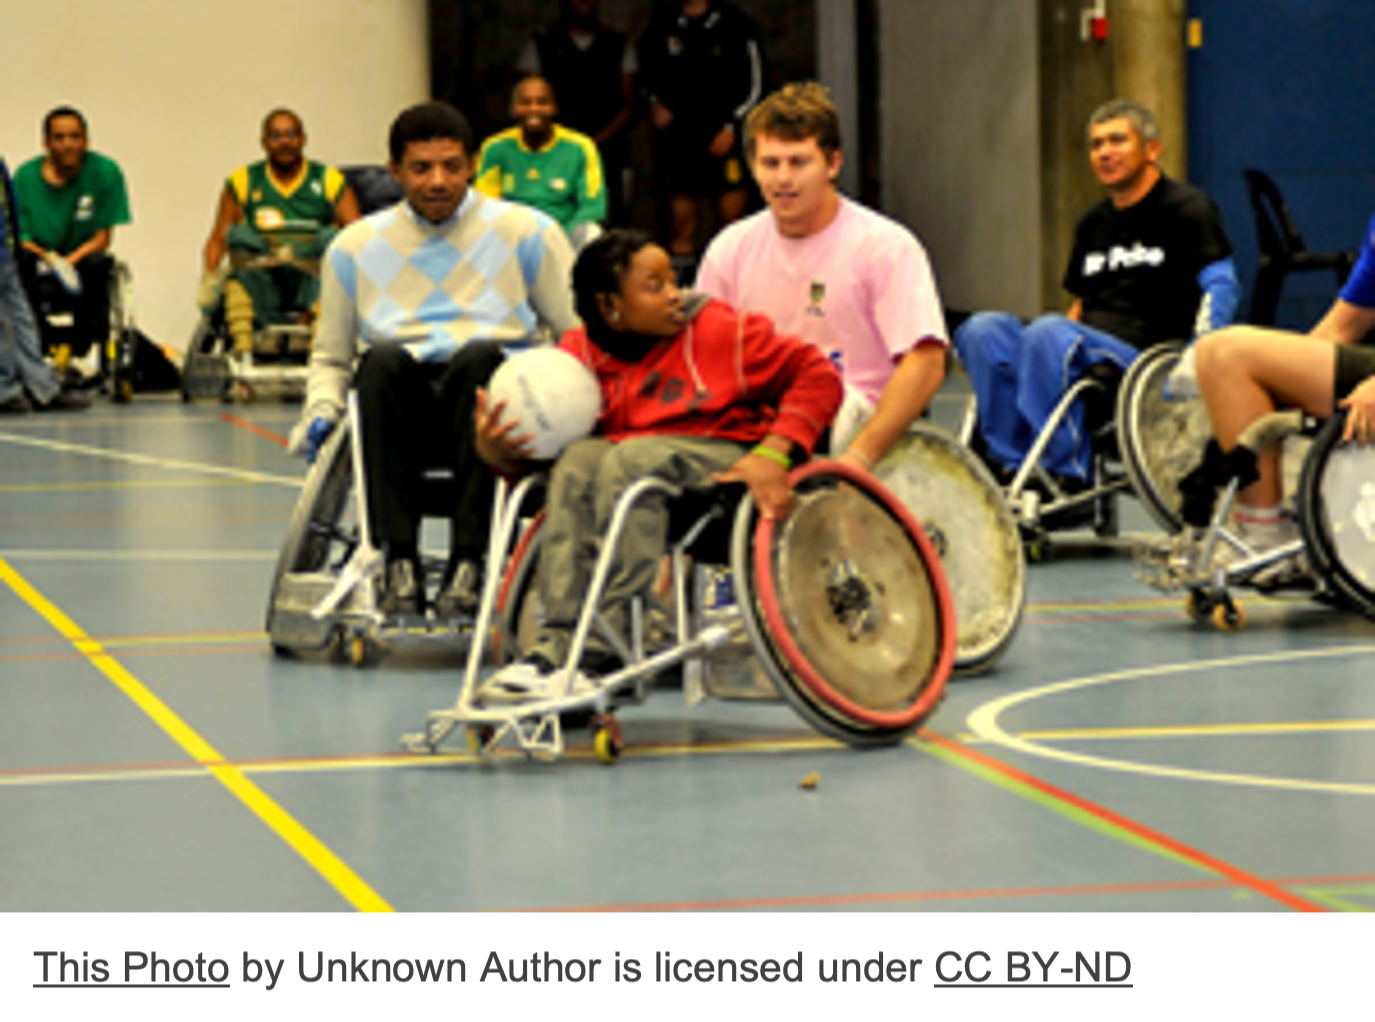 Young people playing wheelchair basket ball